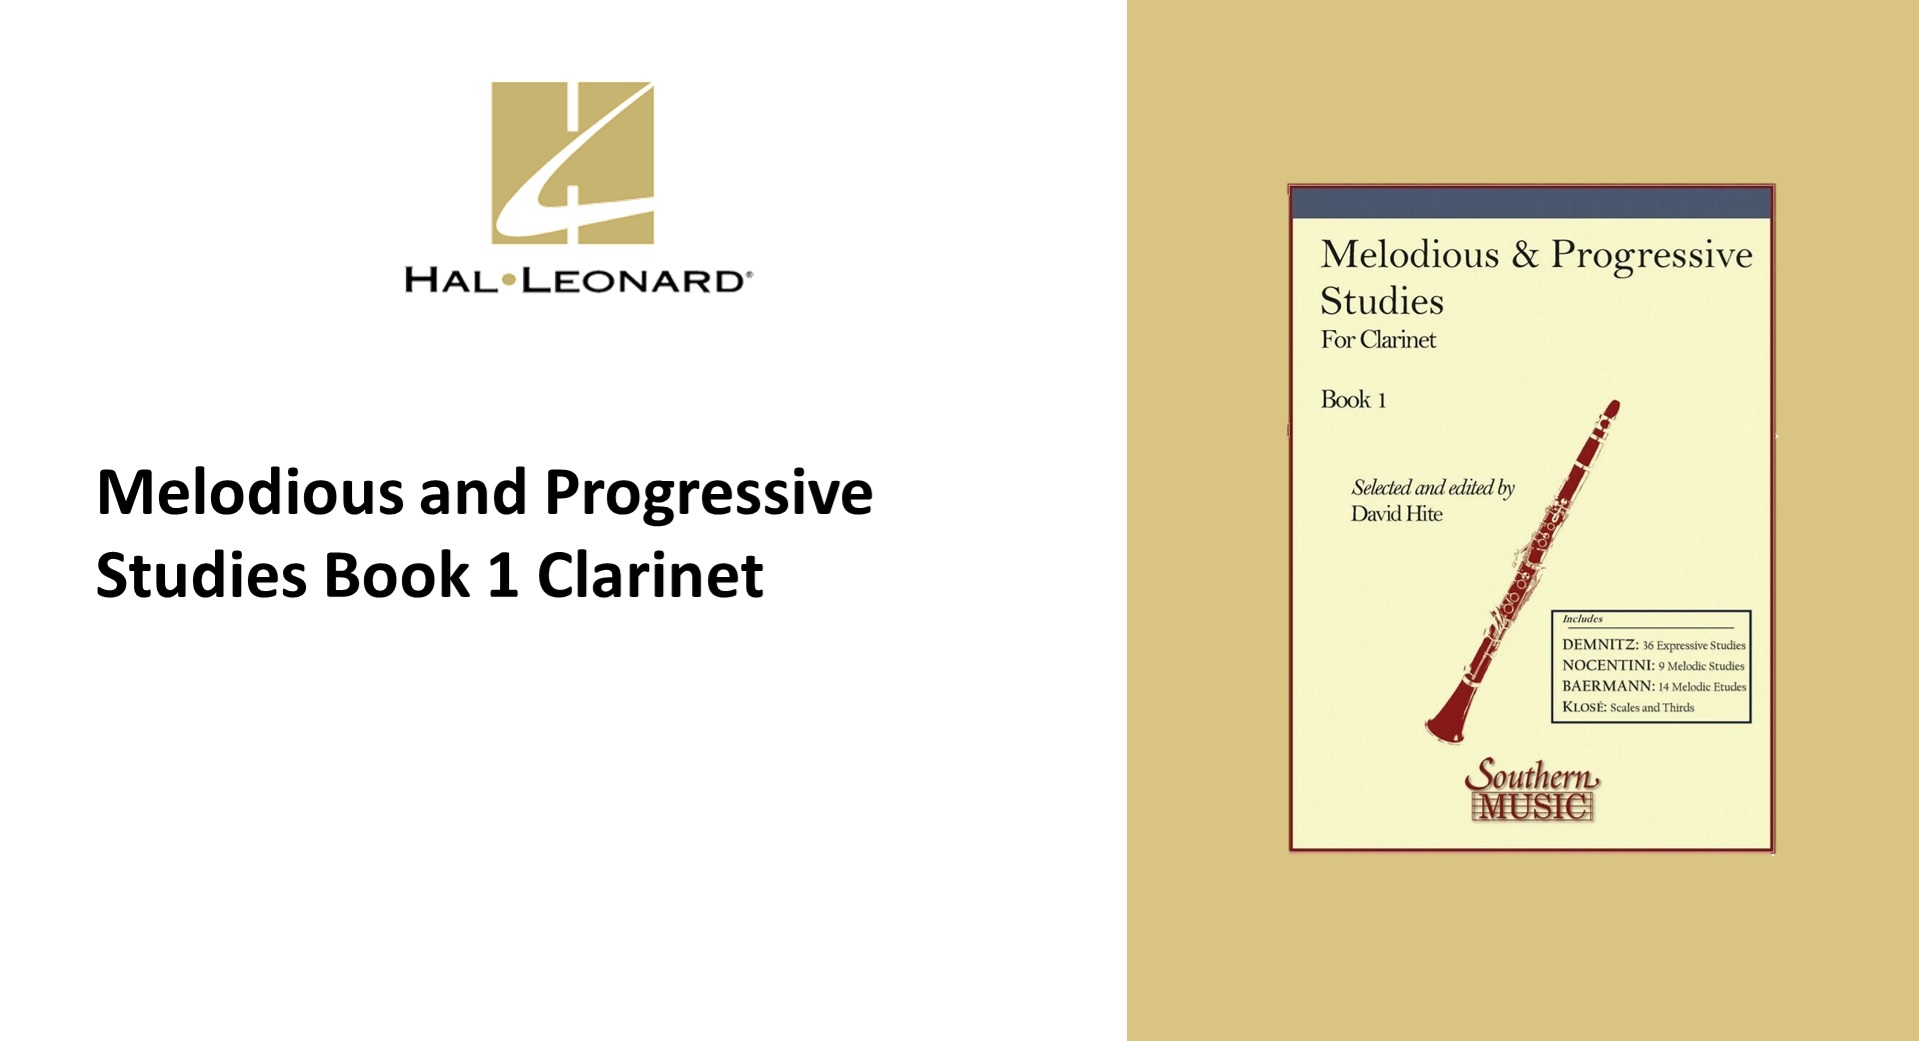 Melodious and Progressive Studies Book 1 Clarinet